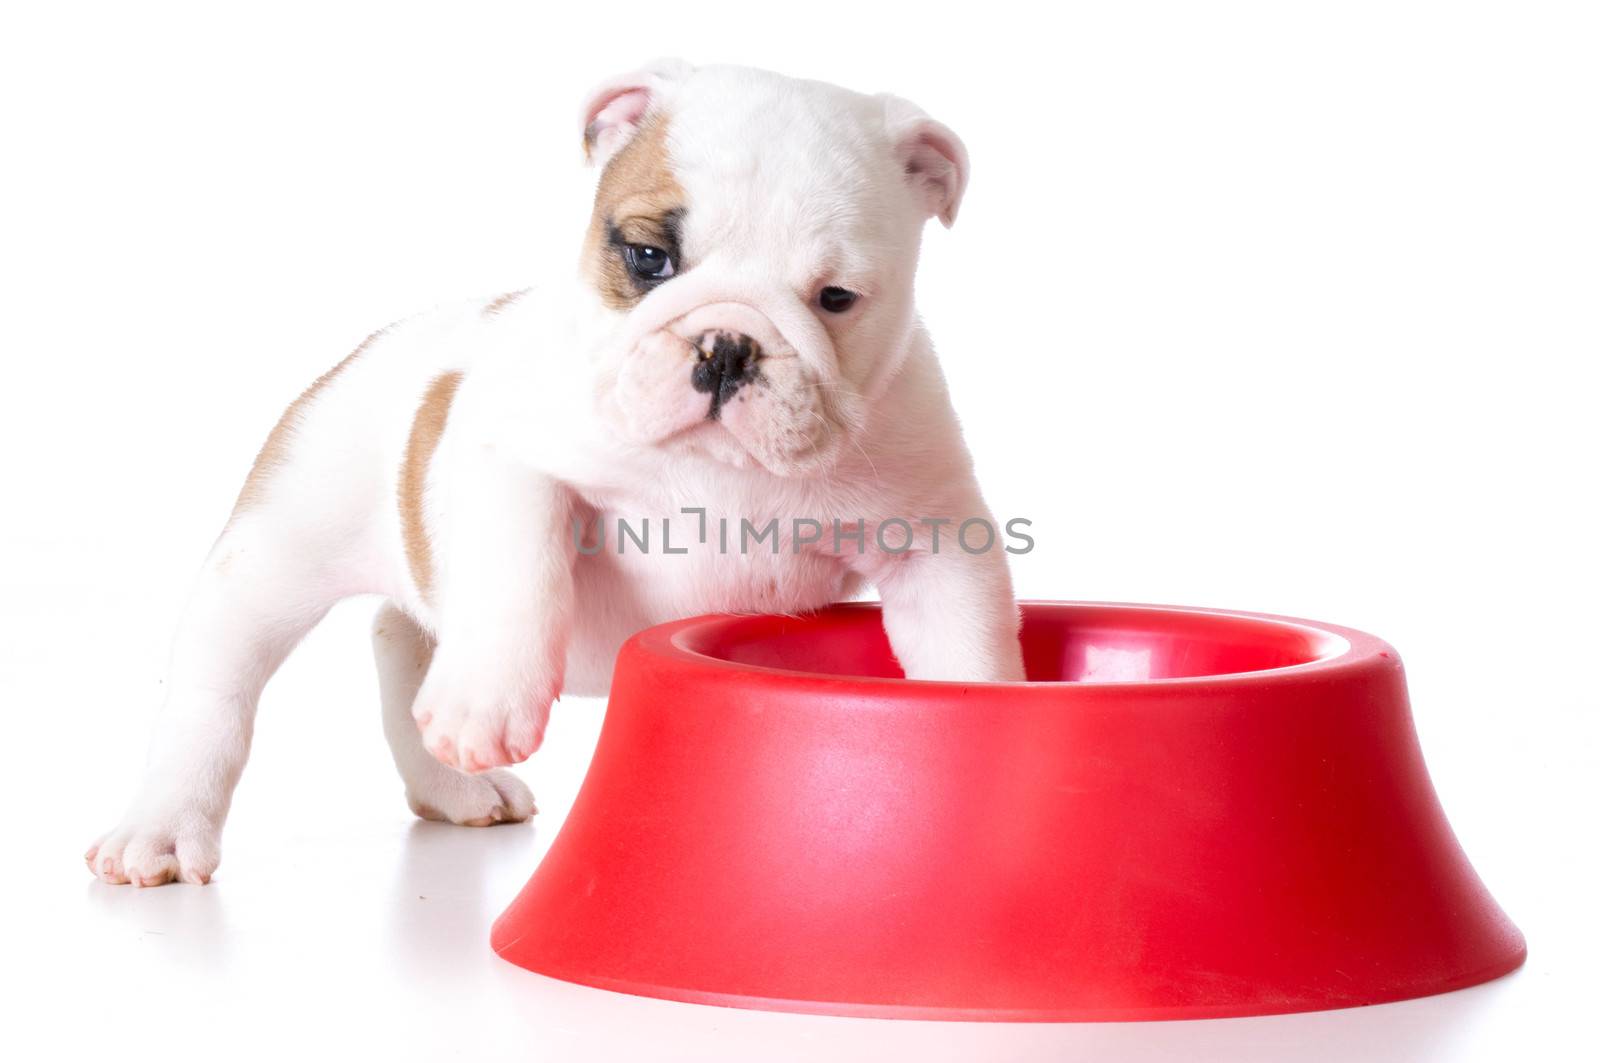 hungry puppy - bulldog standing inside a dog food dish on white background